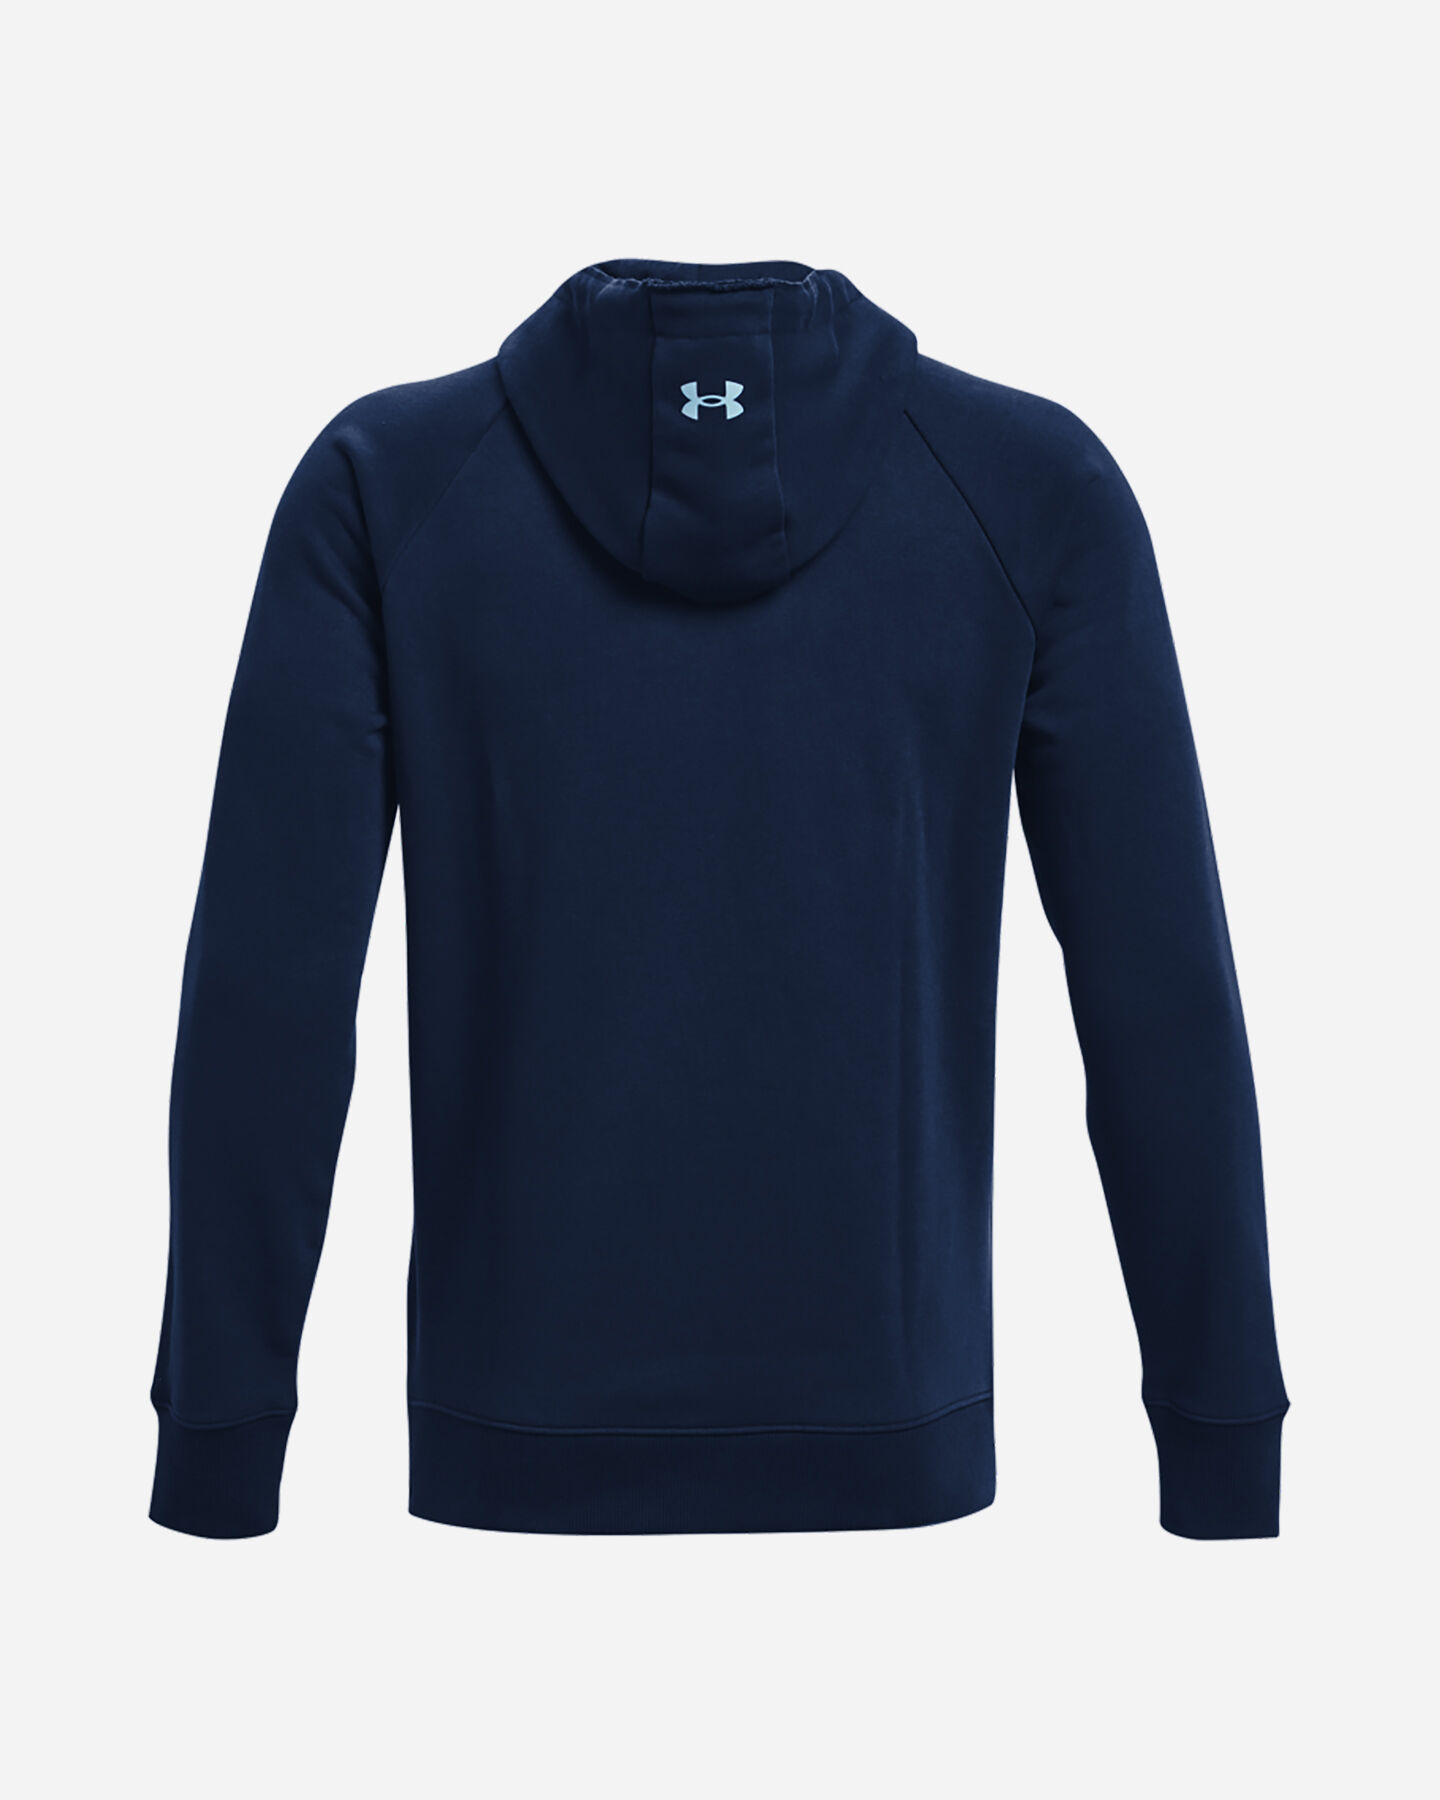  Felpa UNDER ARMOUR THE ROCK M S5390612|0408|XL scatto 1